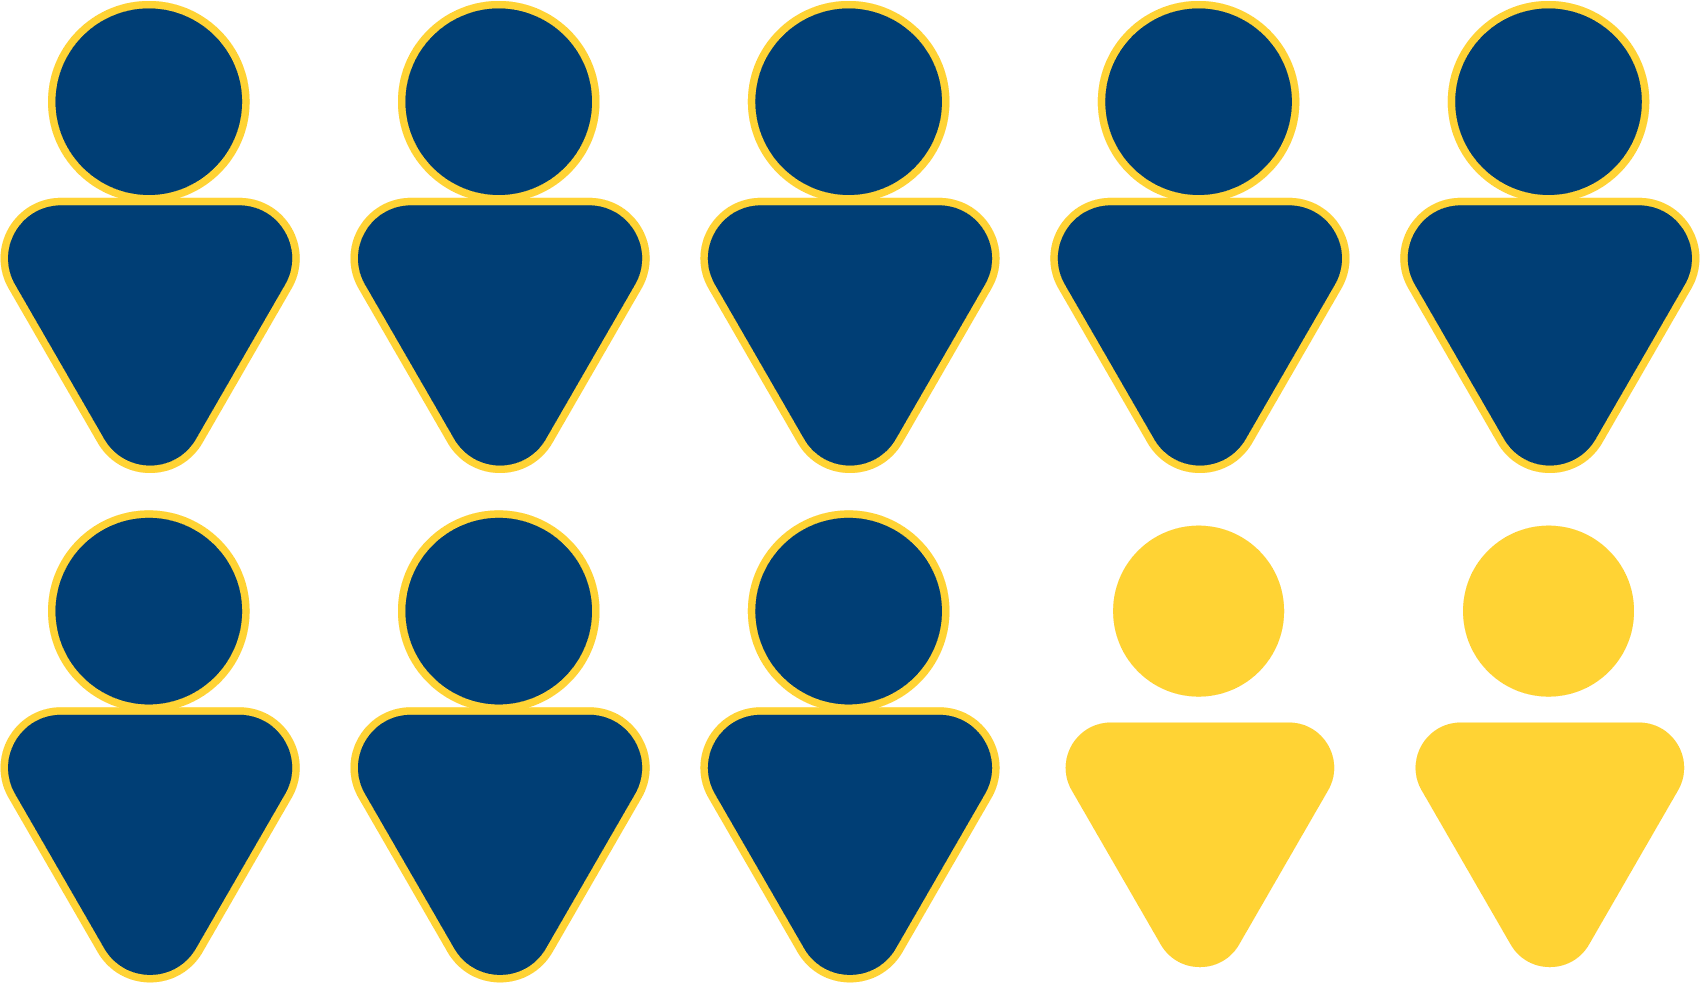 Graphic shows 10 person icons, representing 10 families, 8 of the 10 are in blue, 2 are in yellow, showing that almost 8 in 10 families indicate that they believe teachers have respect for their children